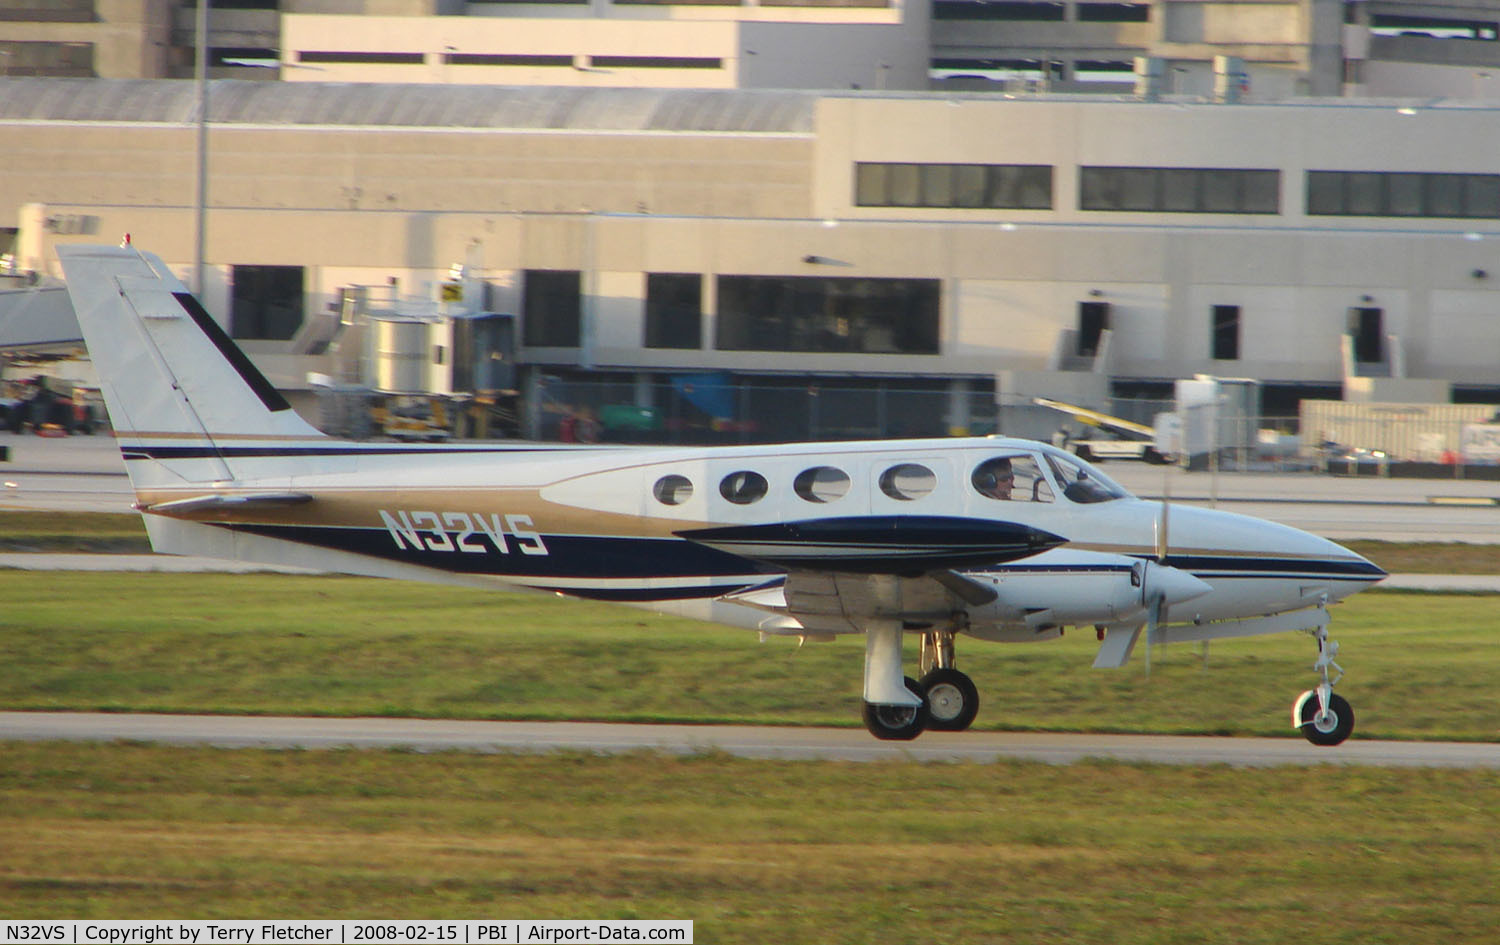 N32VS, 1972 Cessna 340 C/N 340-0025, The business aircraft traffic at West Palm Beach on the Friday before President's Day always provides the aviation enthusiast / photographer with a treat